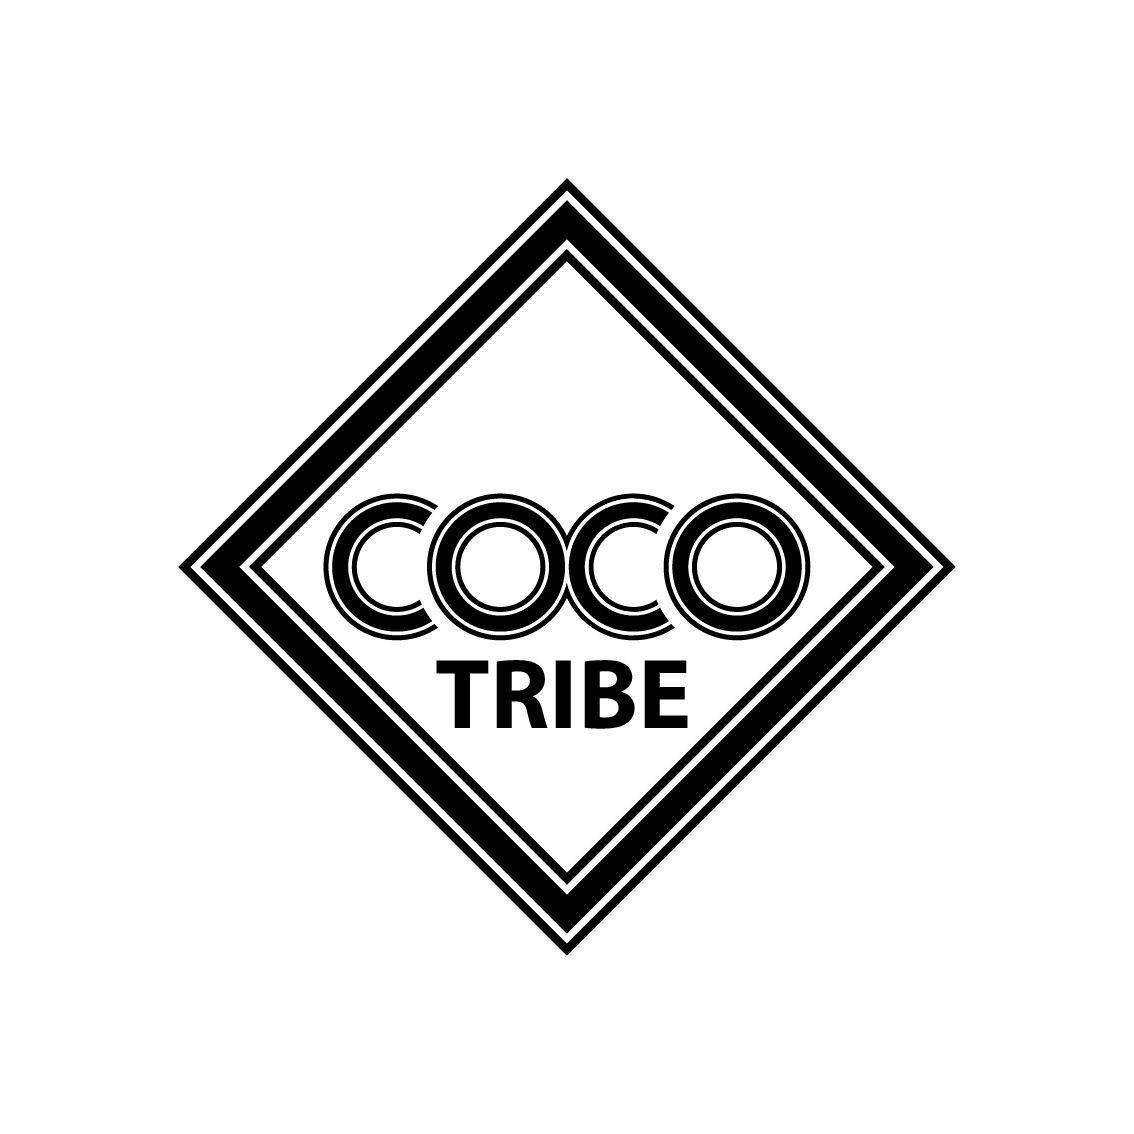 Y Brand Logo - Upmarket, Modern, Fashion Logo Design for CoCo Tribe or Co&Co Tribe ...